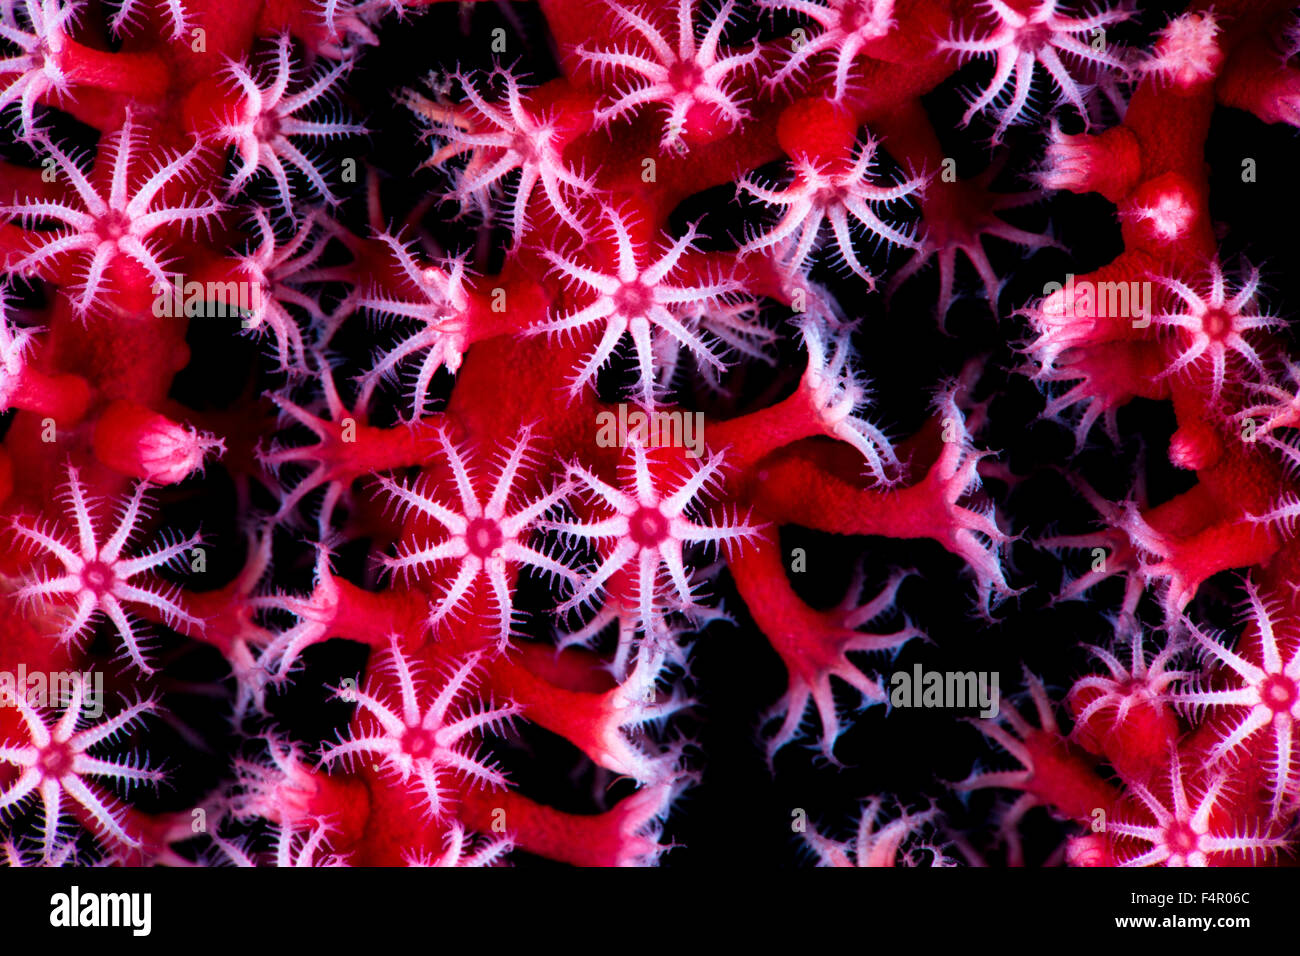 Close Up Detail of Red Soft Coral Feeding with Polyps Exposed on Black Background Stock Photo